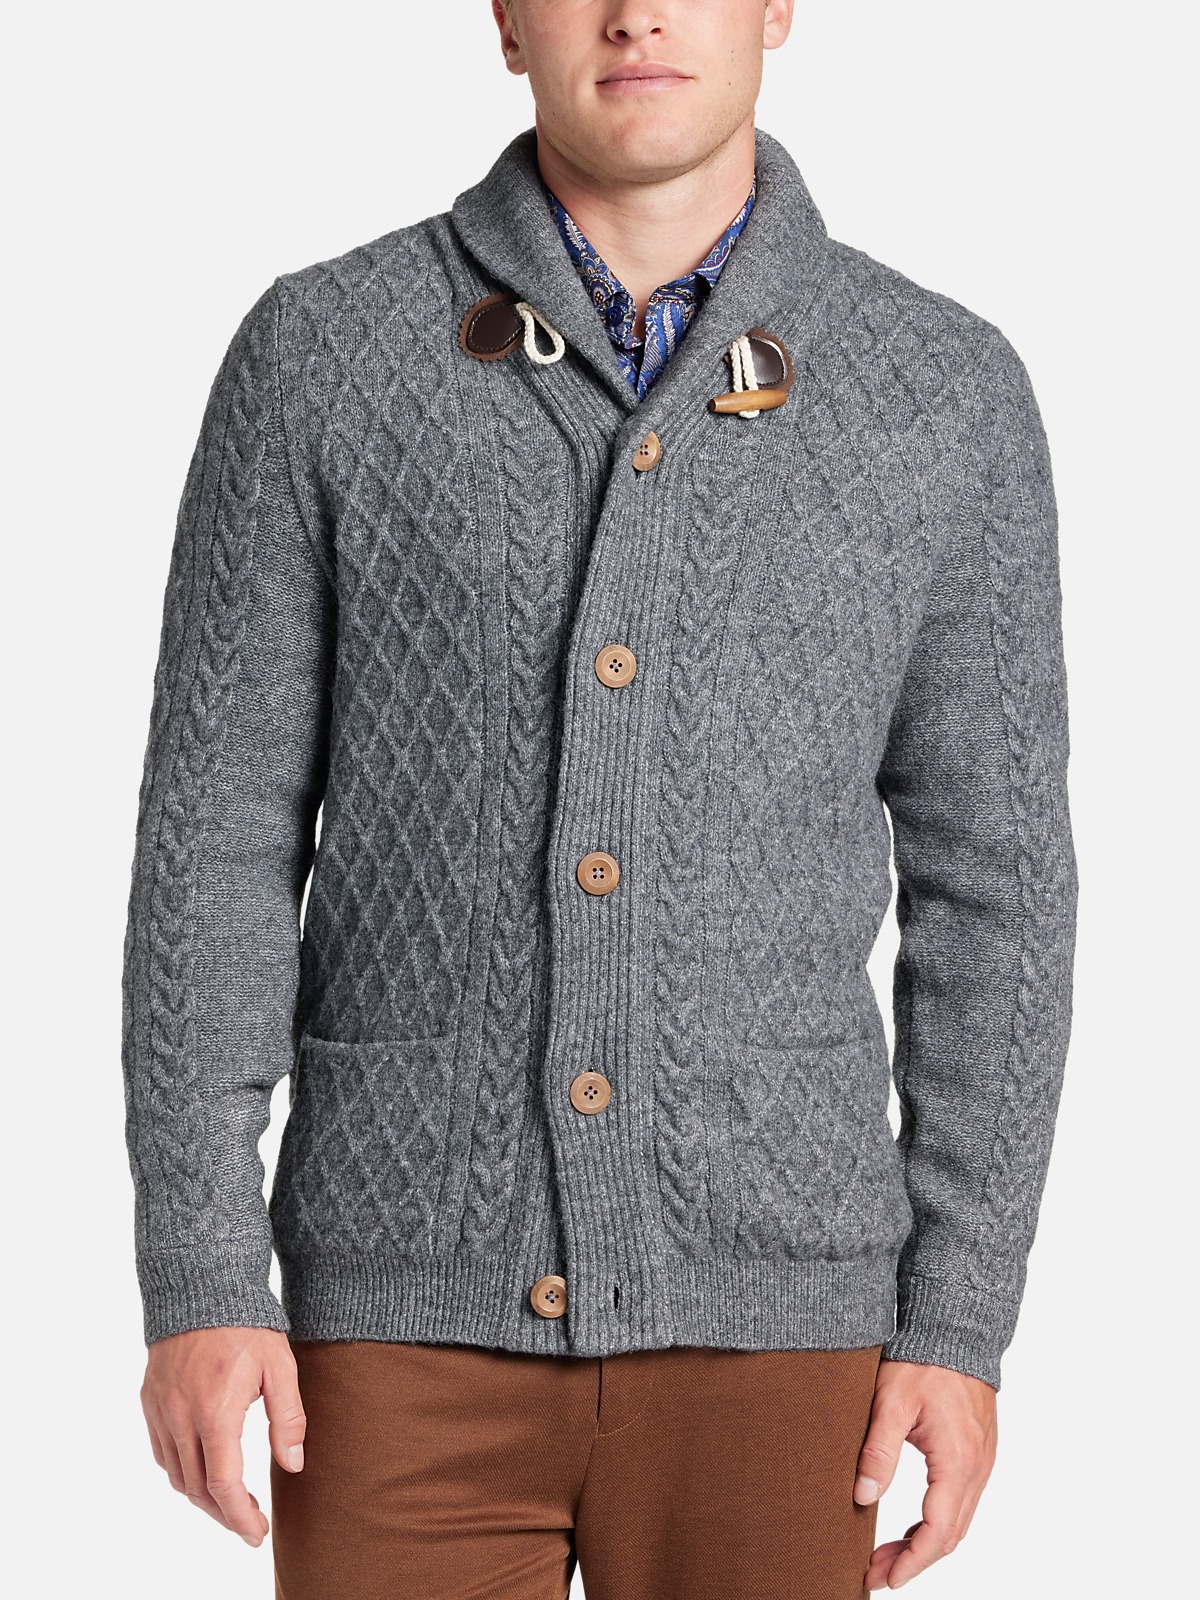 Paisley & Gray Slim Fit Toggle Collar Cardigan Sweater | All Clearance ...